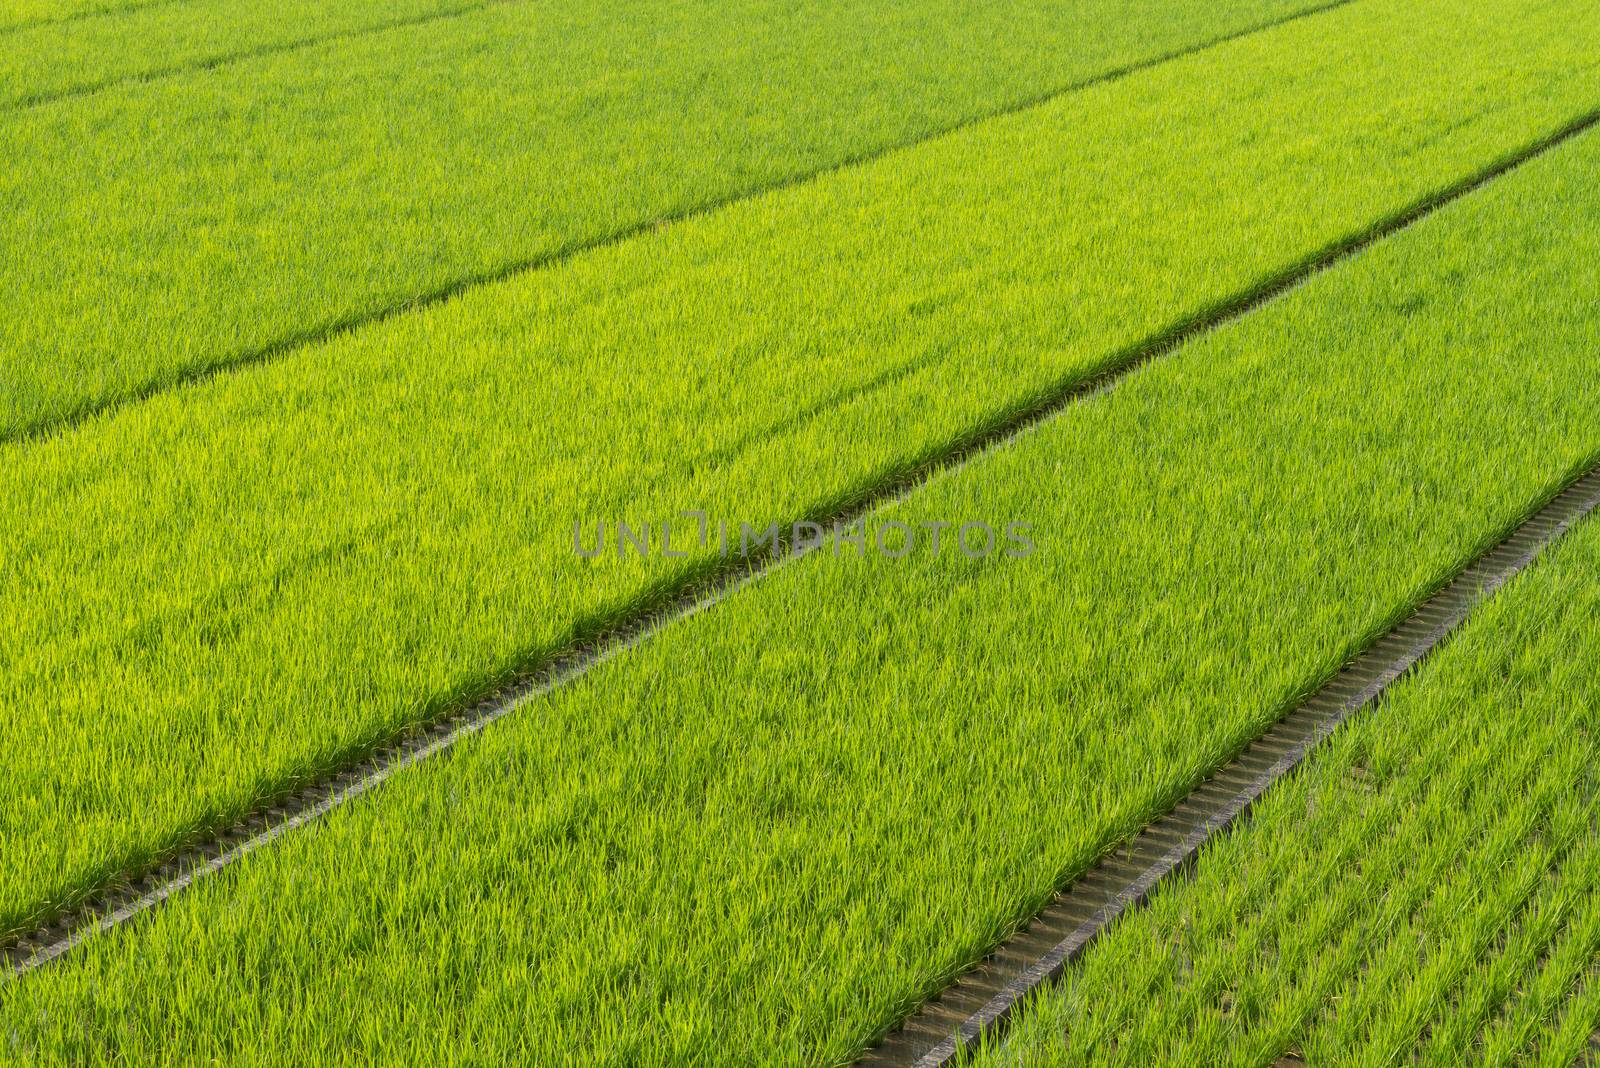 Endless Rice Fields by justtscott